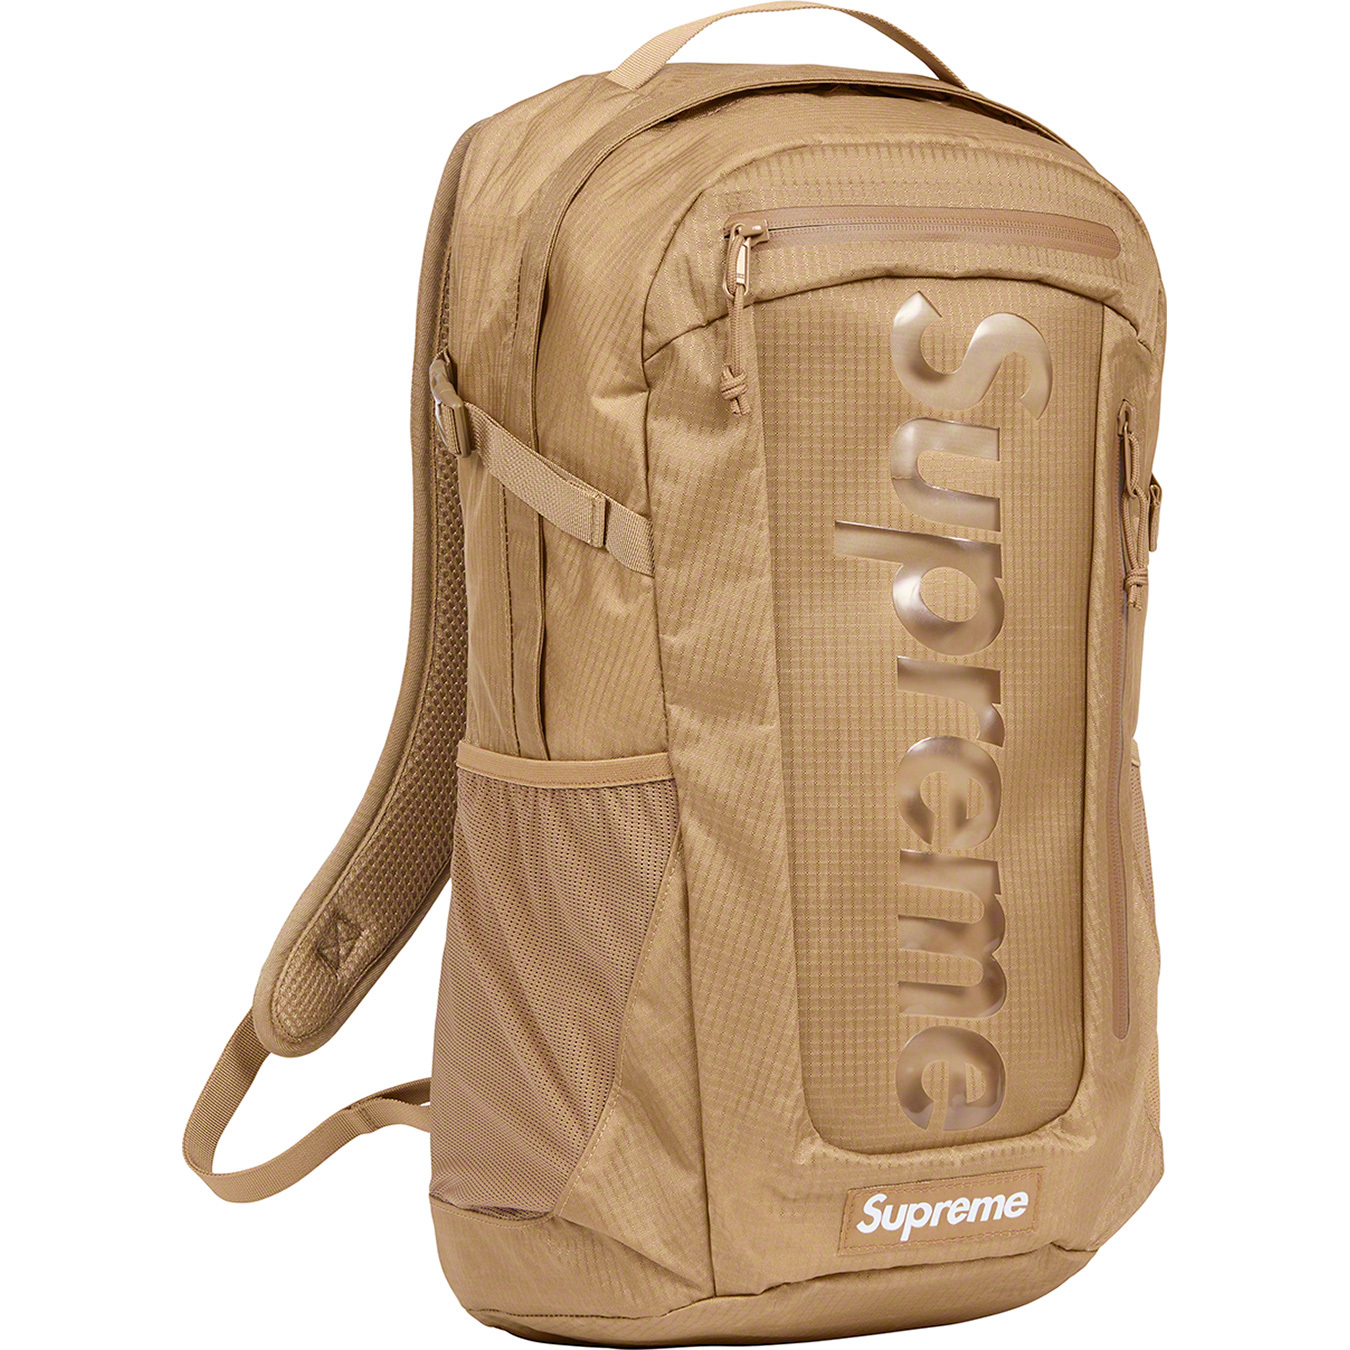 Supreme Spring/Summer 2021 Bags and Backpacks